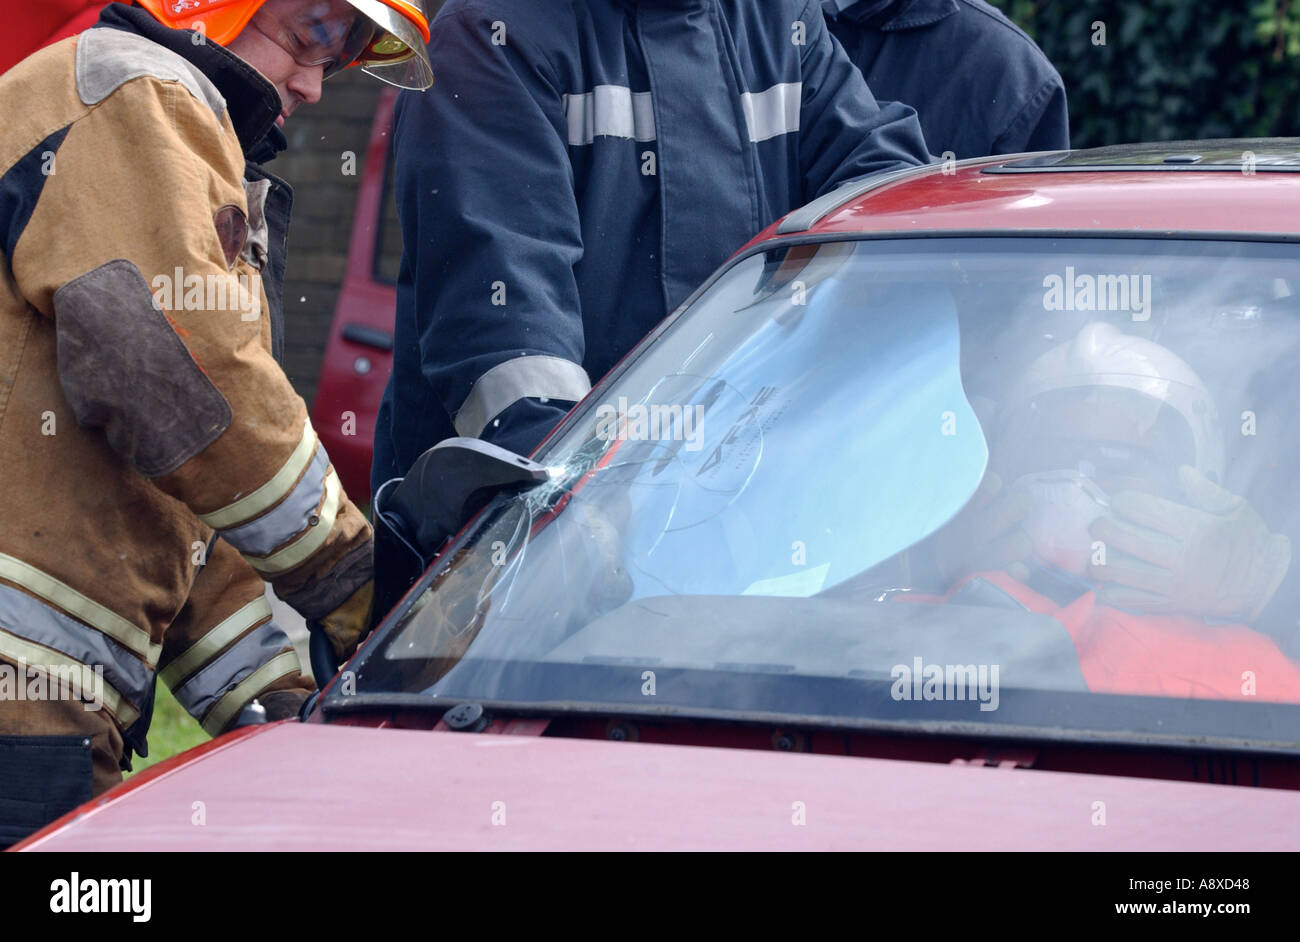 Firefighters cut open a car during a training drill Stock Photo